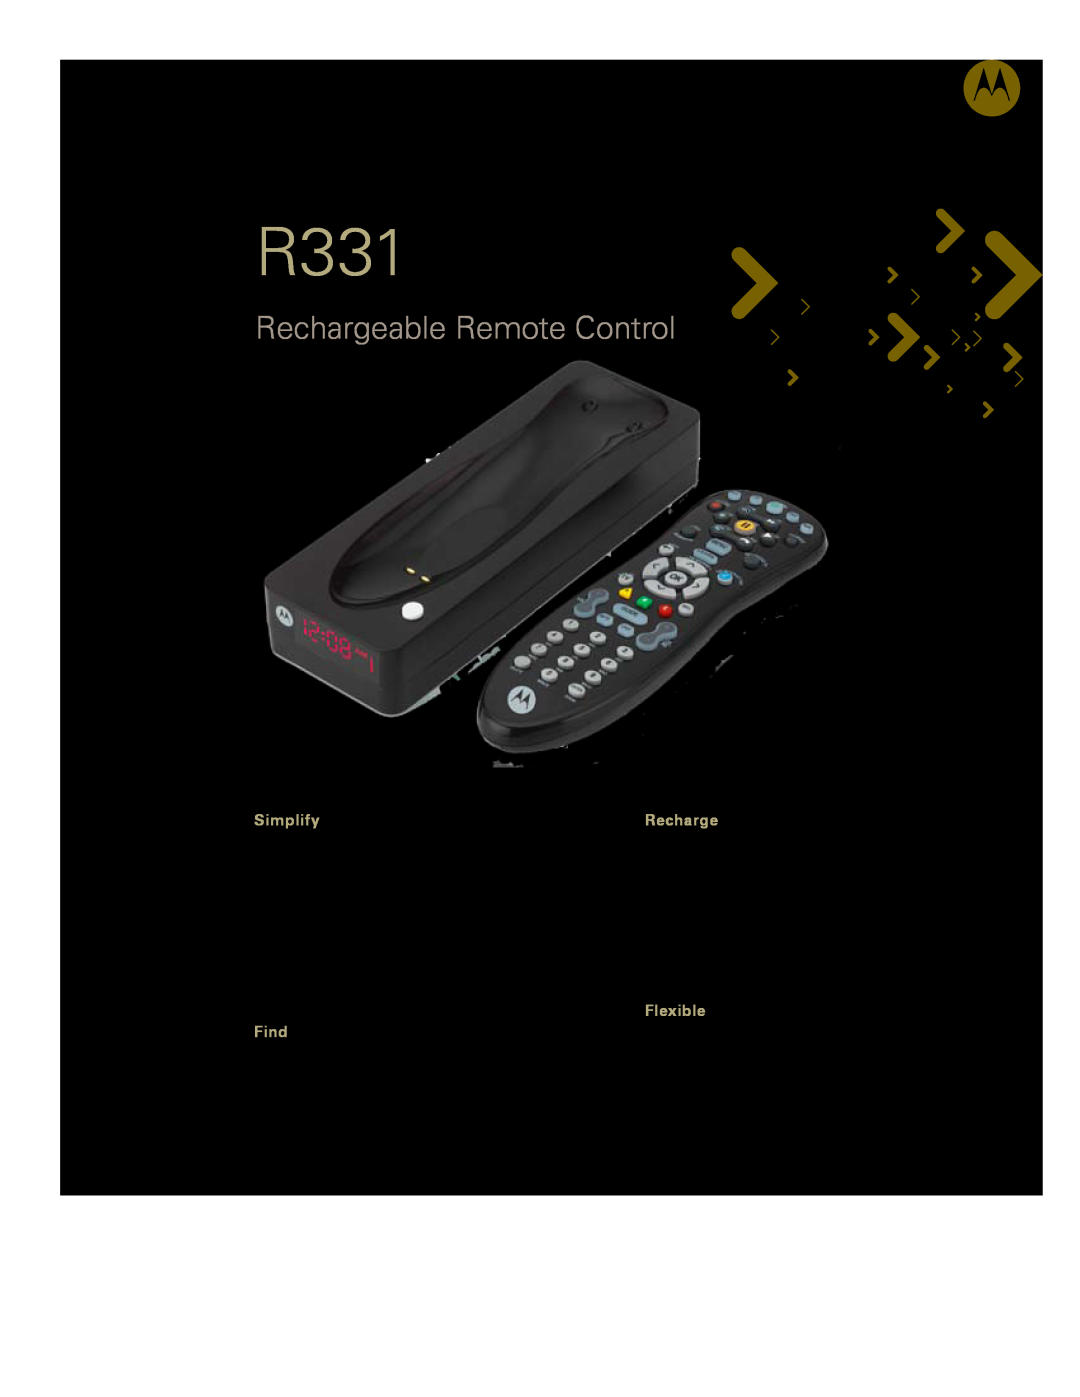 Motorola R331 specifications Rechargeable Remote Control, Eco-friendly, high performance rechargeable remote control, Find 